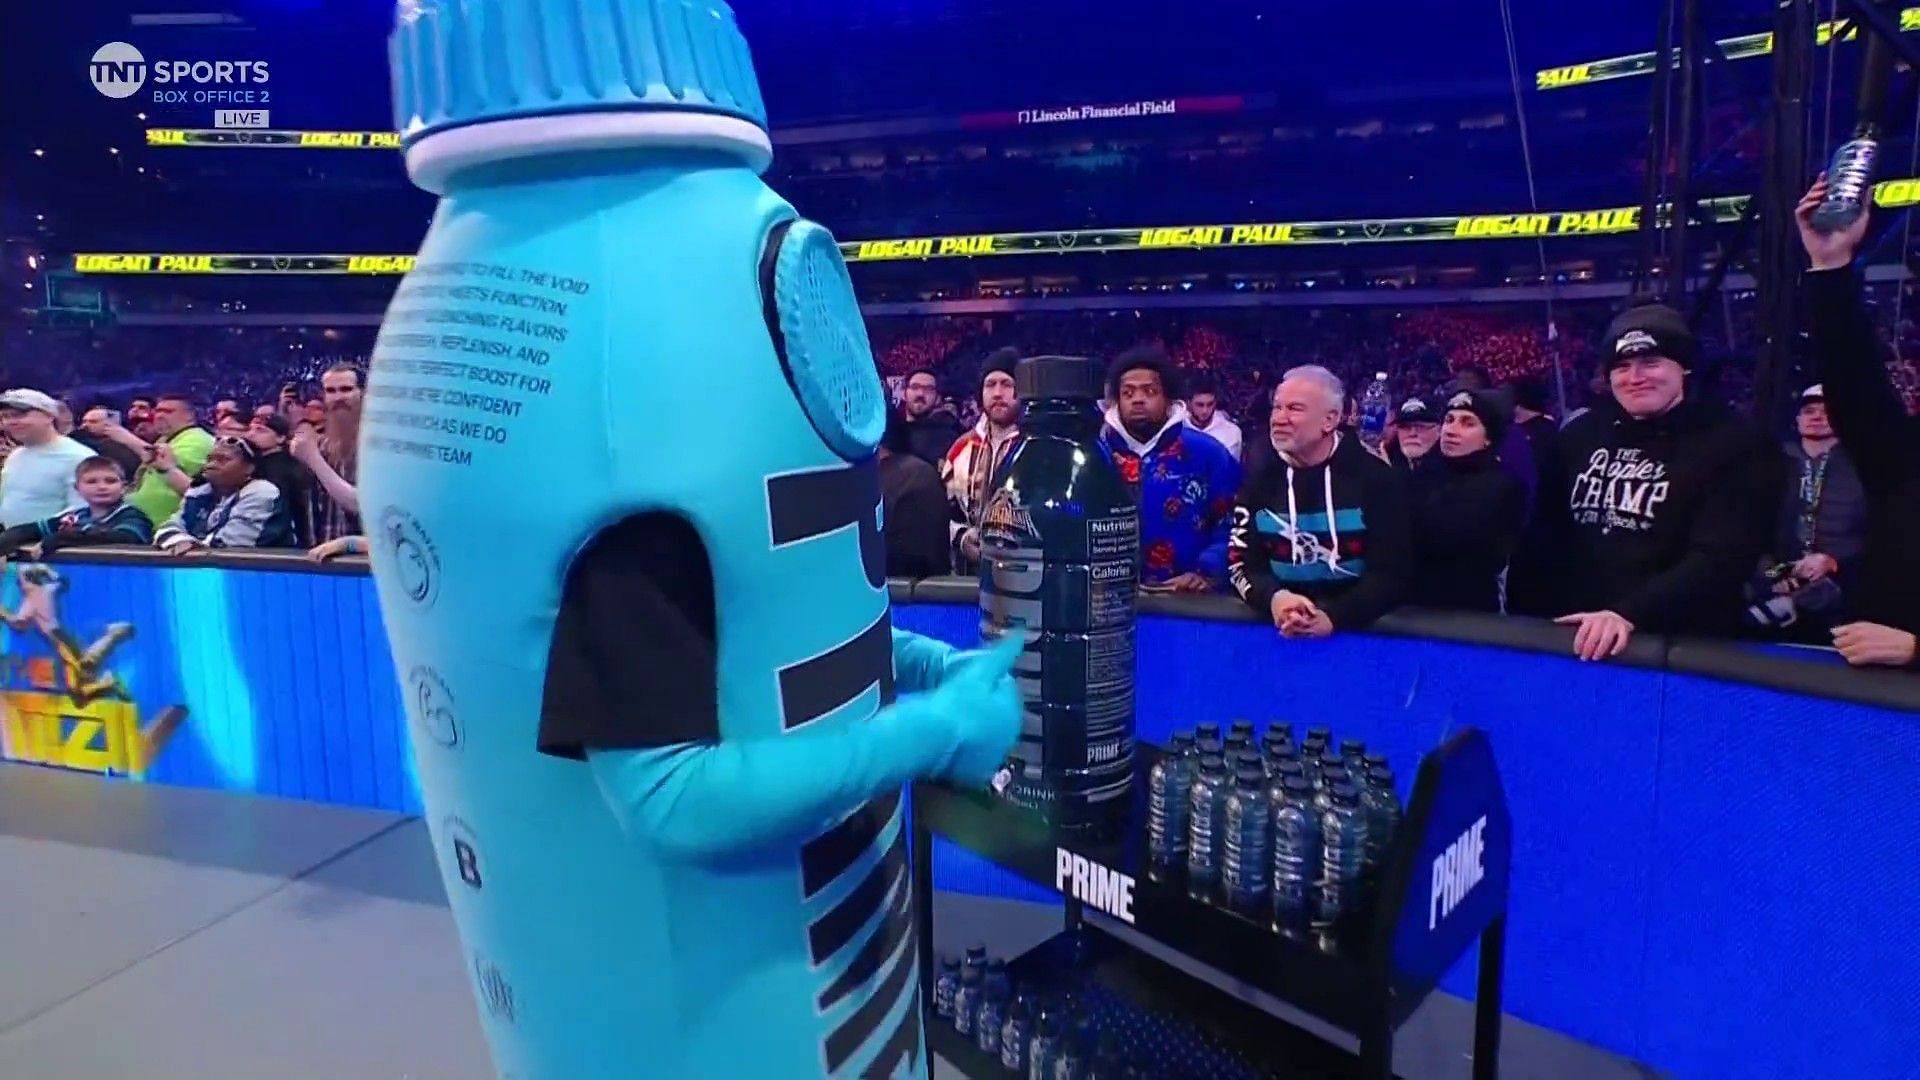 Who was dressed as the PRIME mascot?